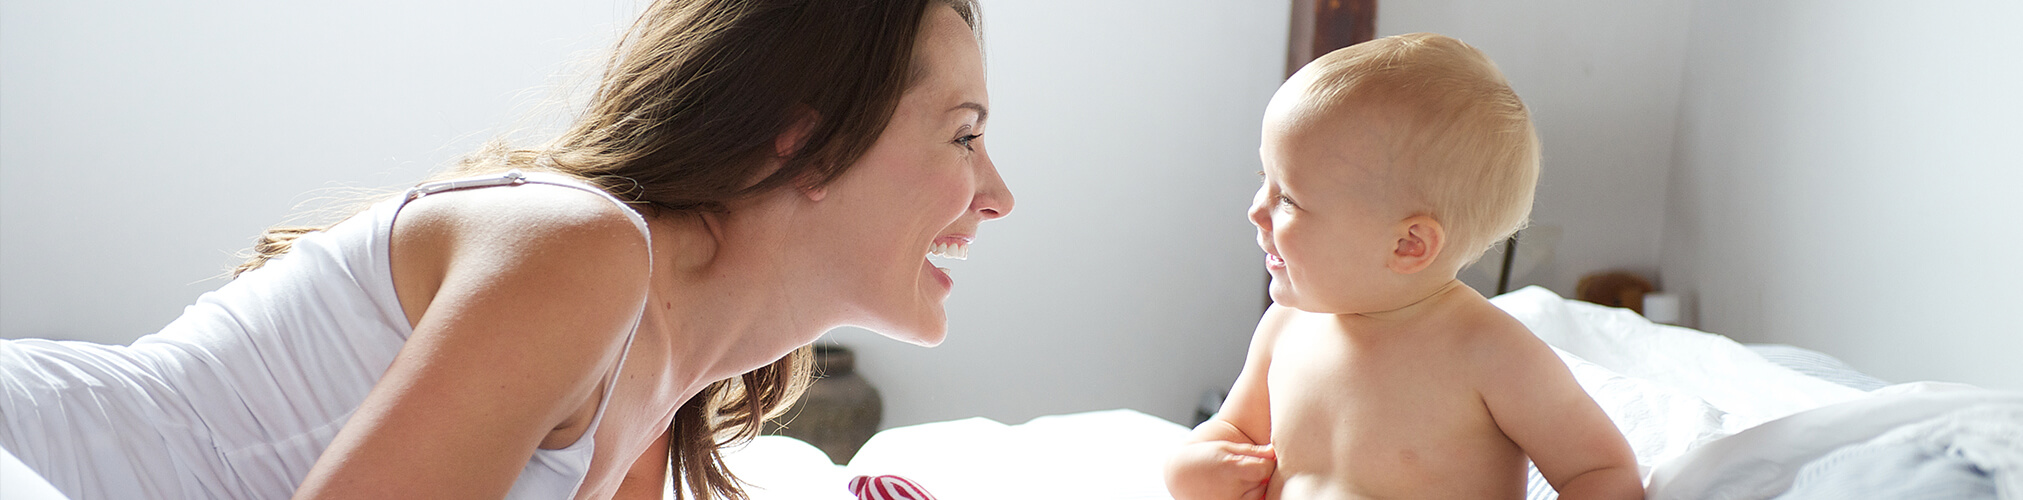 Mother and baby smiling - positive parenting